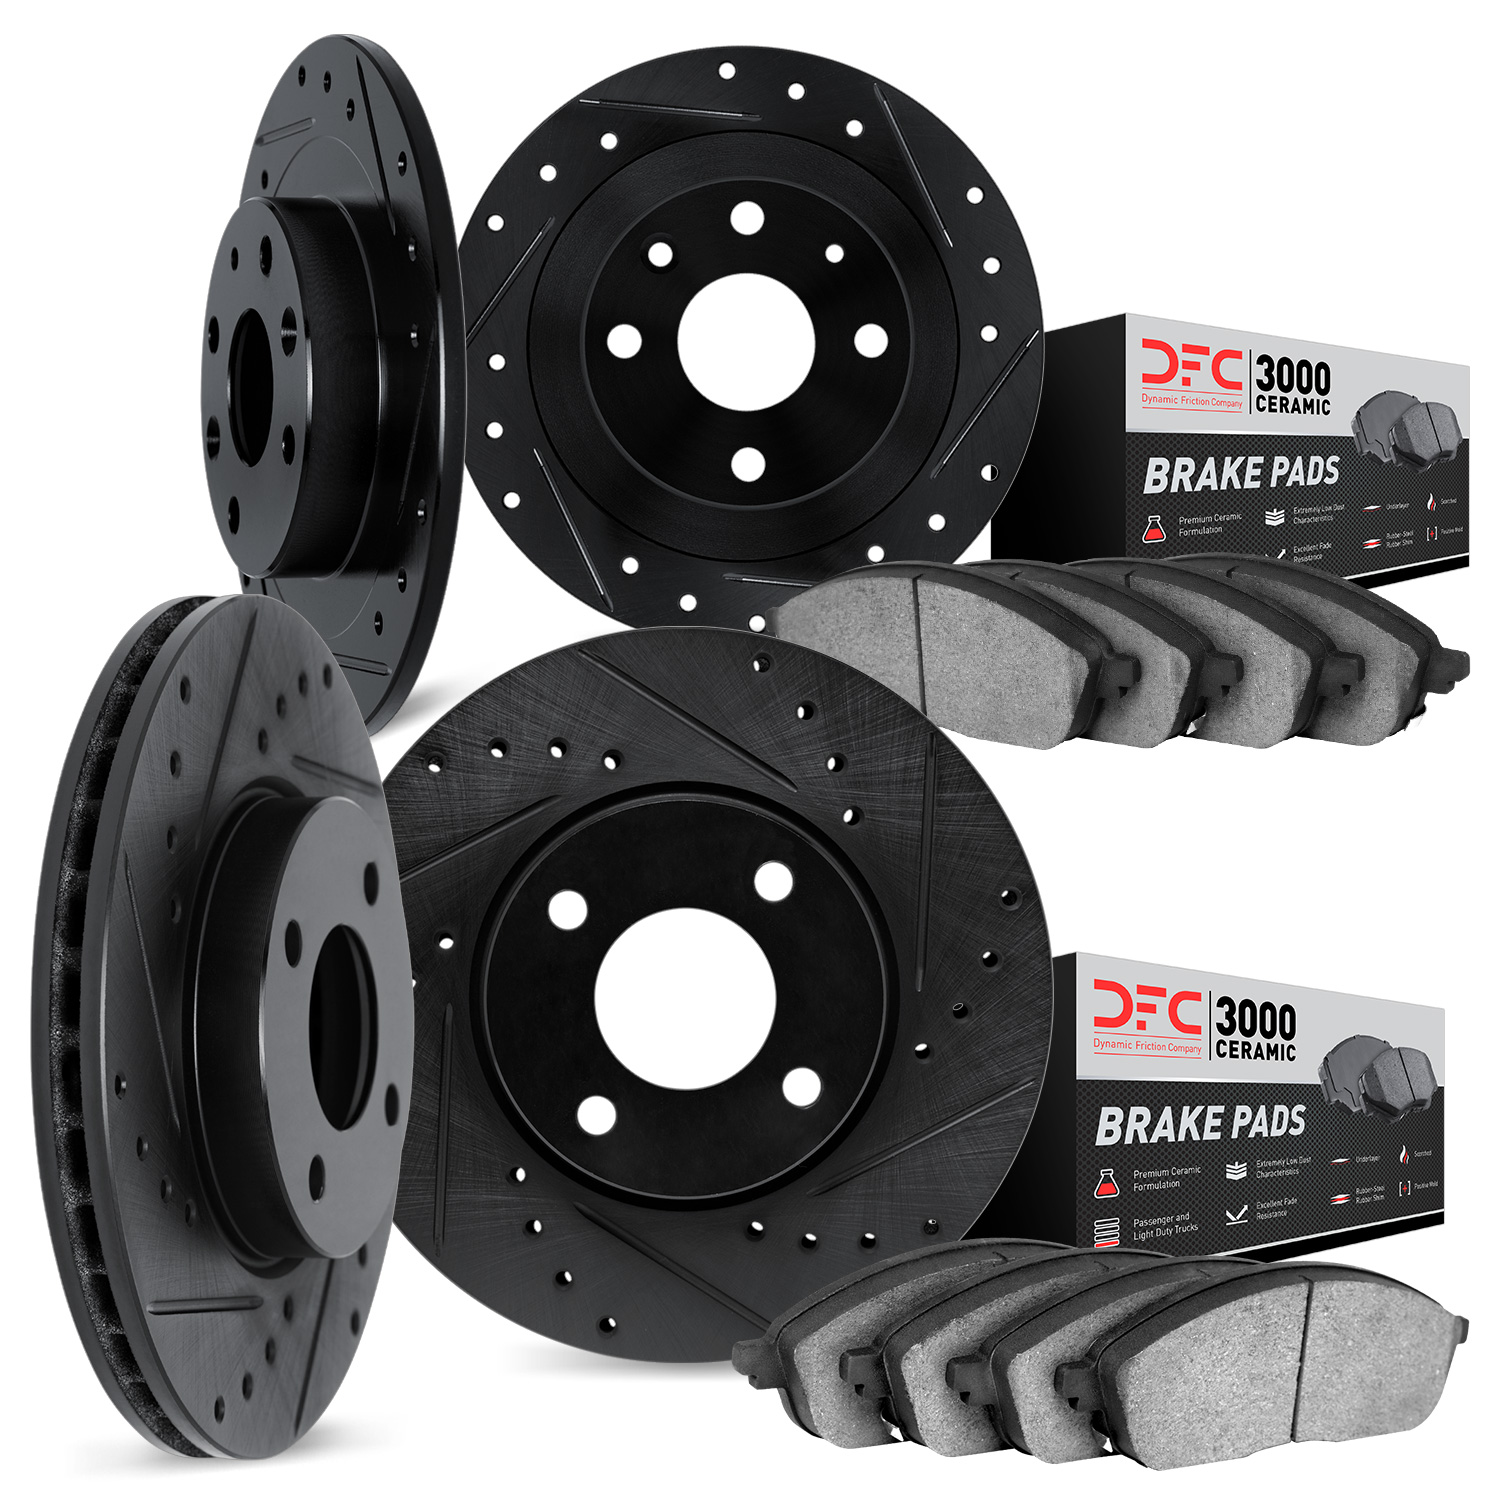 8304-58002 Drilled/Slotted Brake Rotors with 3000-Series Ceramic Brake Pads Kit [Black], 1988-1988 Acura/Honda, Position: Front